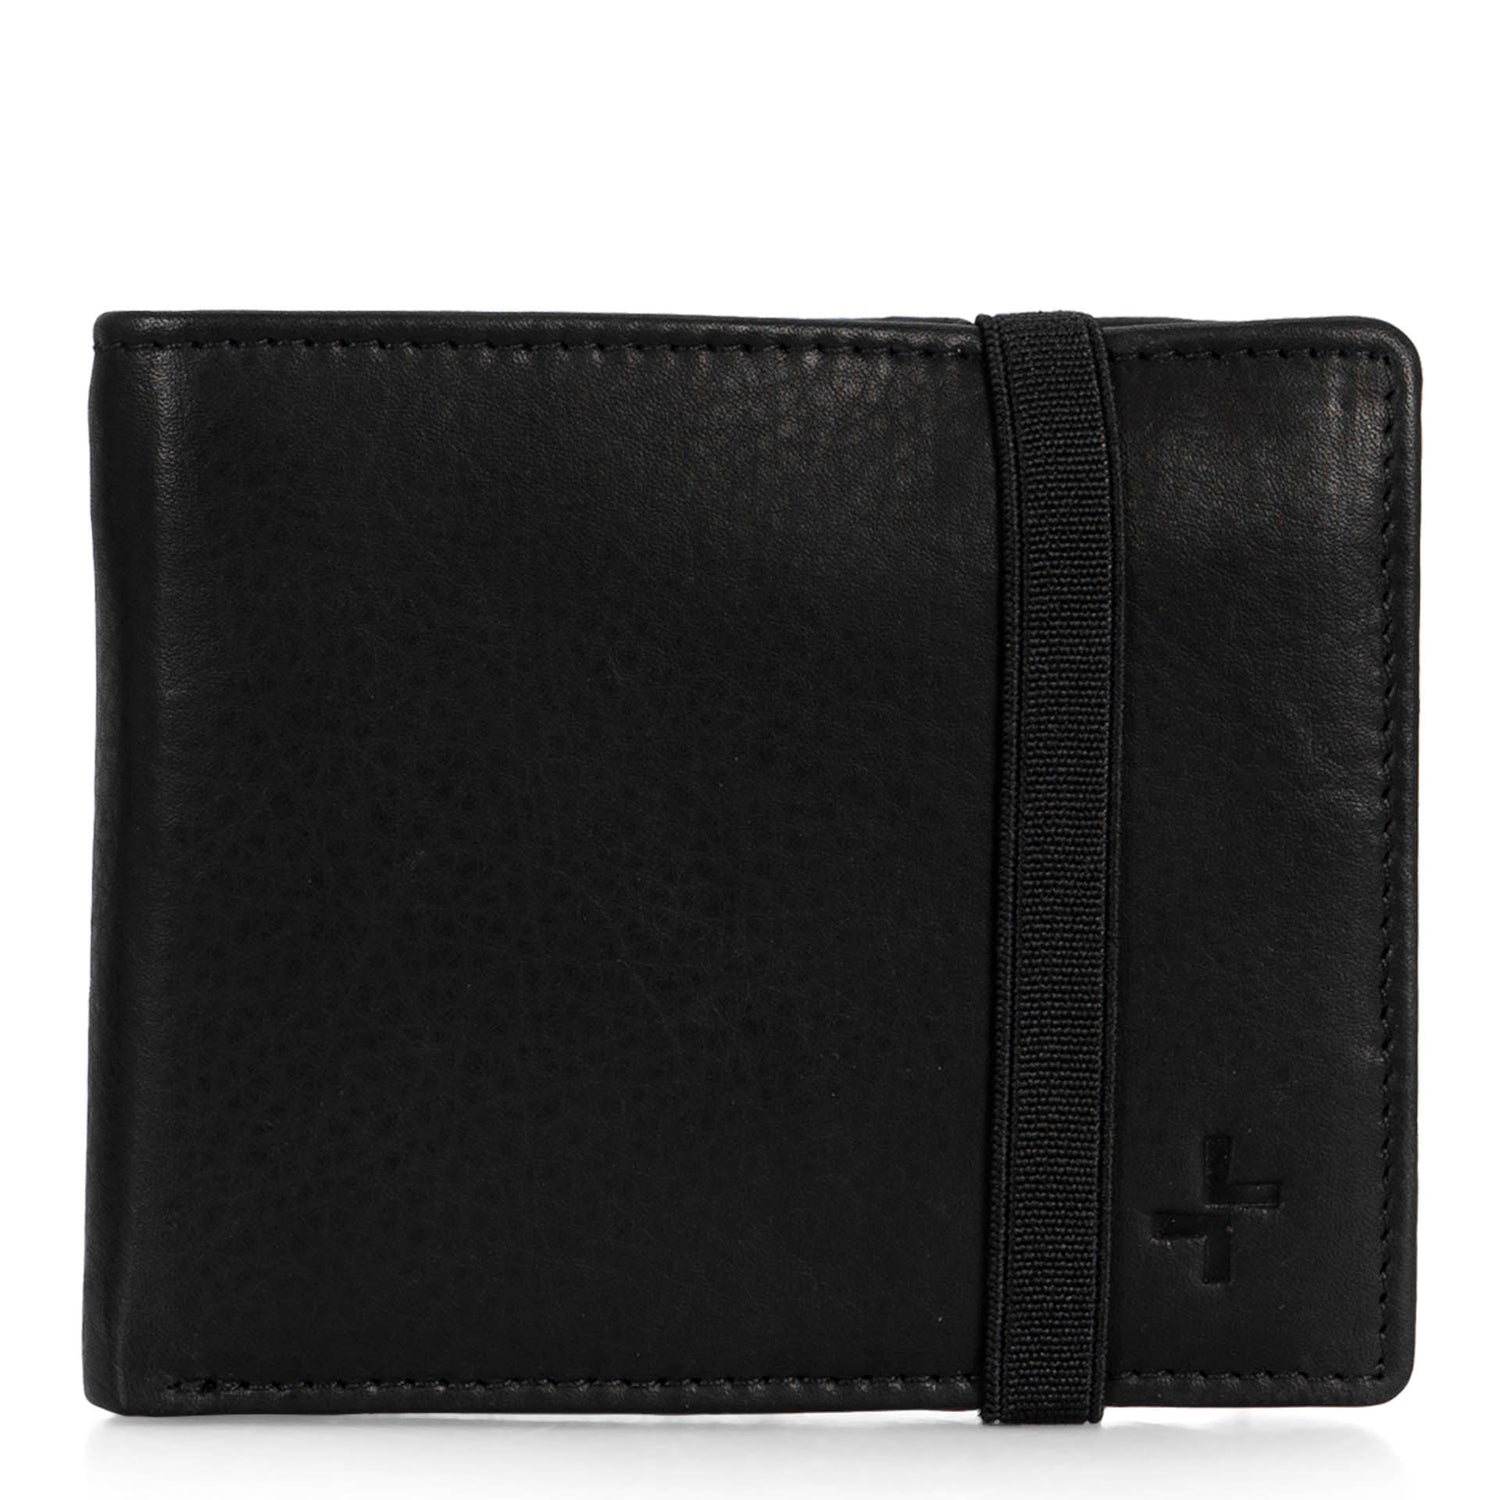 Front of a black leather wallet called Hudson designed by Tracker on a white background, showcasing its supple leather and elastic band.